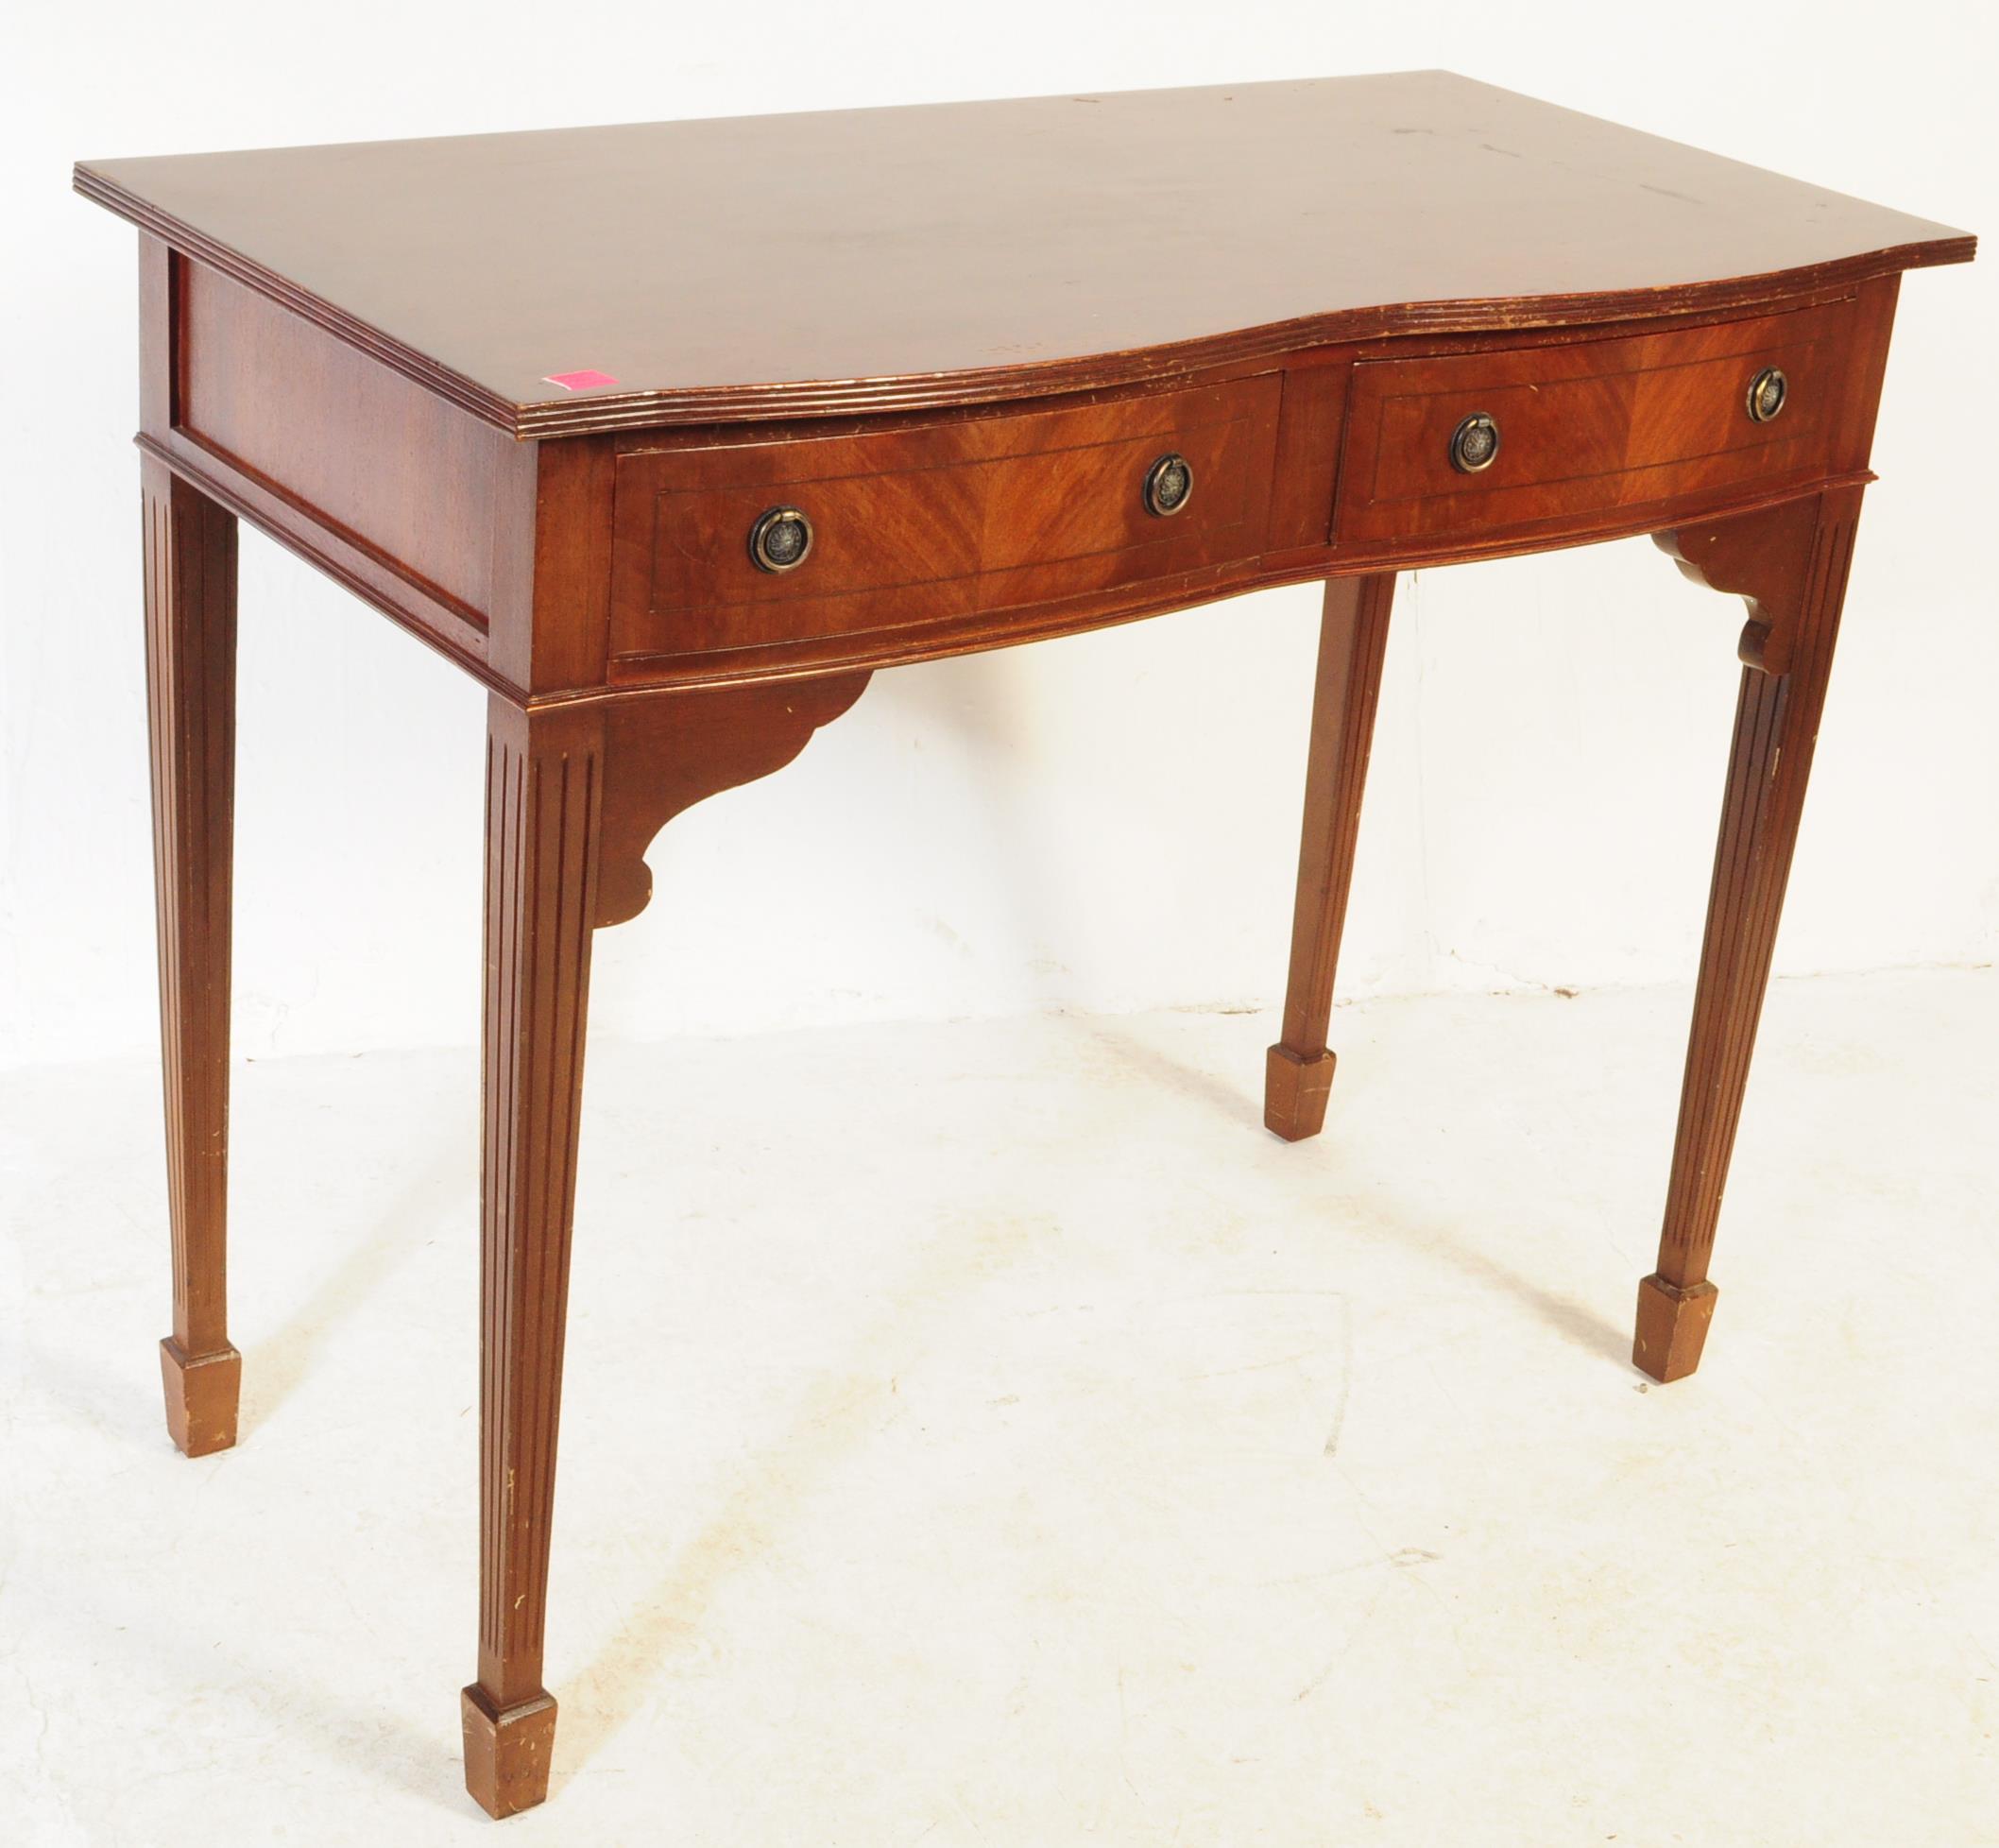 QUEEN ANNE REVIVAL FLAME MAHOGANY WRITING TABLE DESK - Image 2 of 5